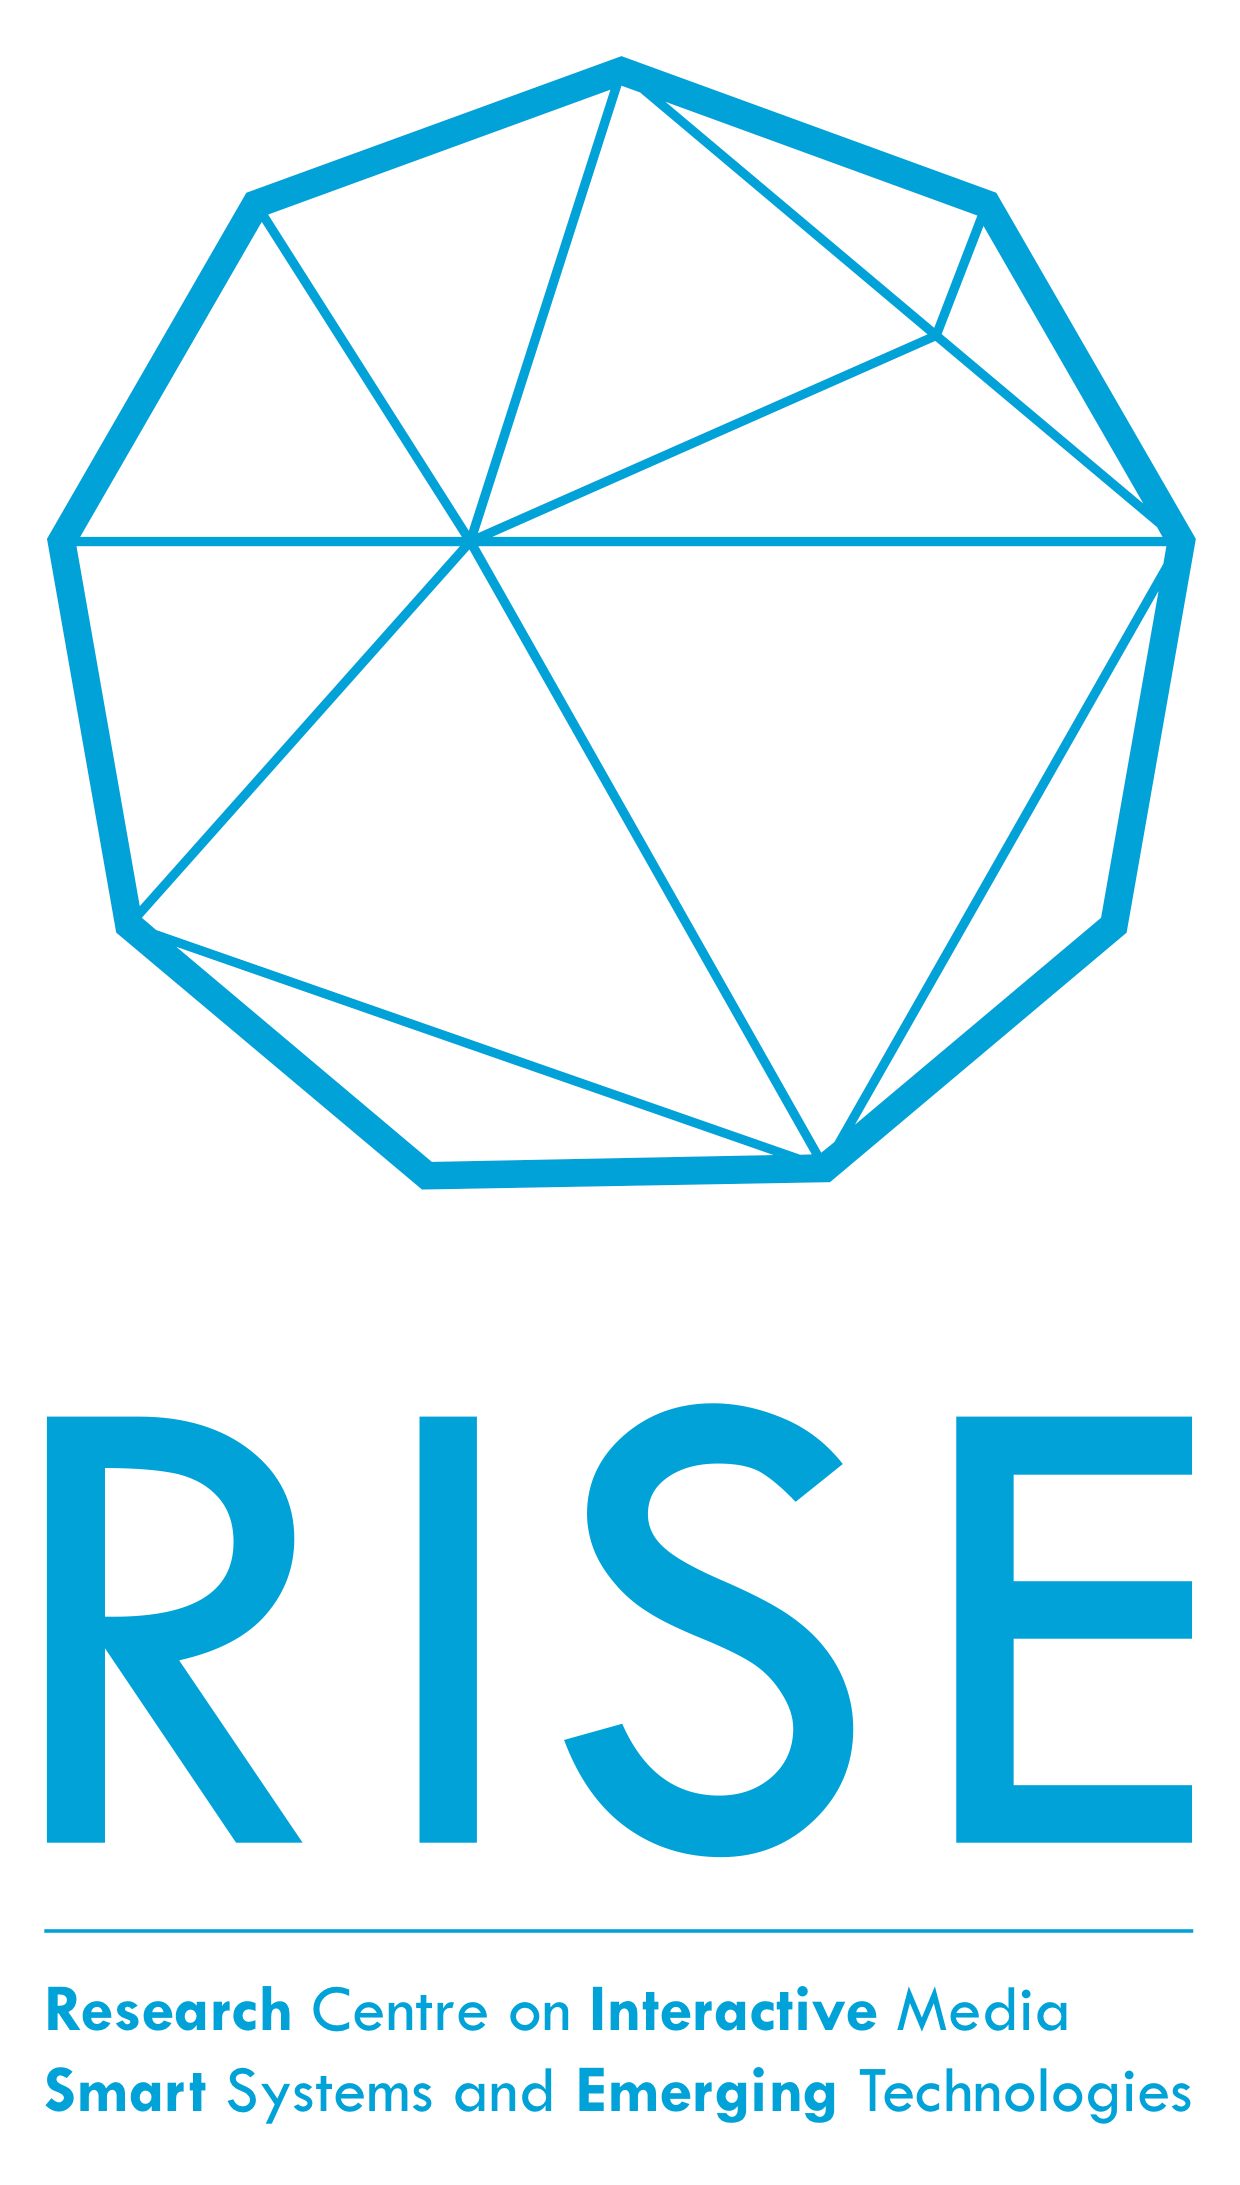 RISE - Research Center on Interractive Media Smart Systems and Emerging Technologies